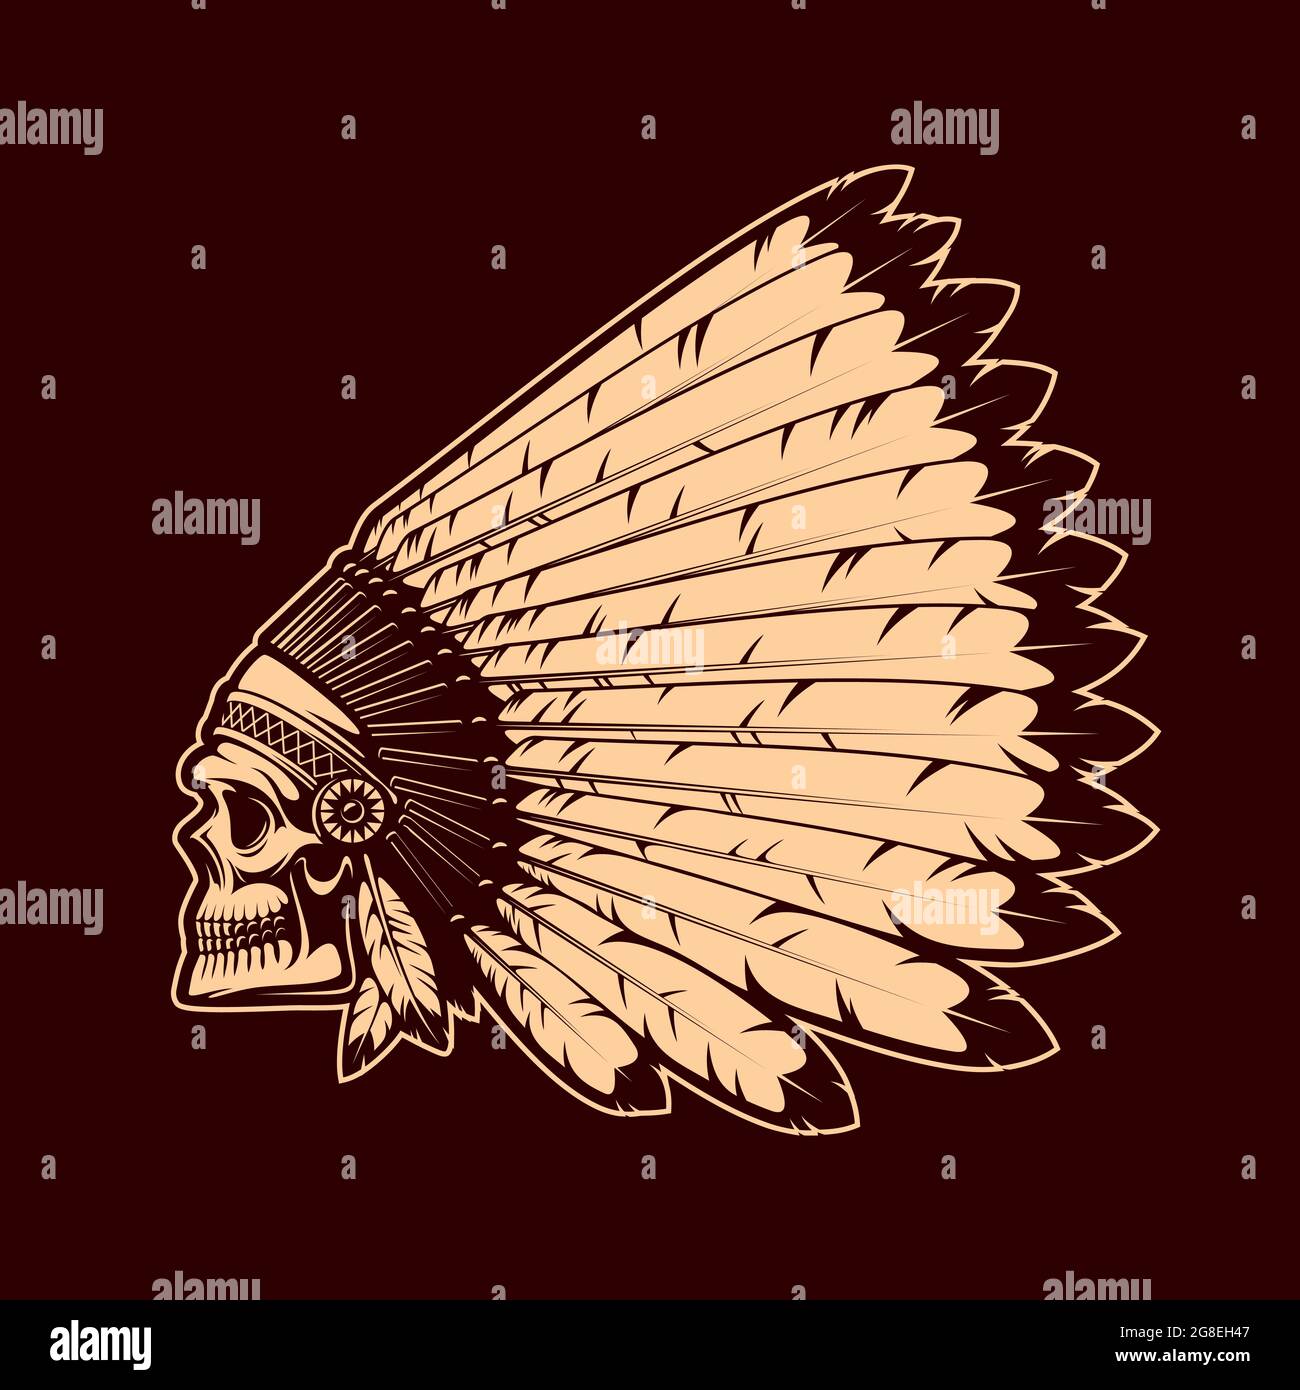 Indian chief skull in war bonnet. Native americans culture and wild west colonization history vector symbol with human skull and feather ritual headdr Stock Vector